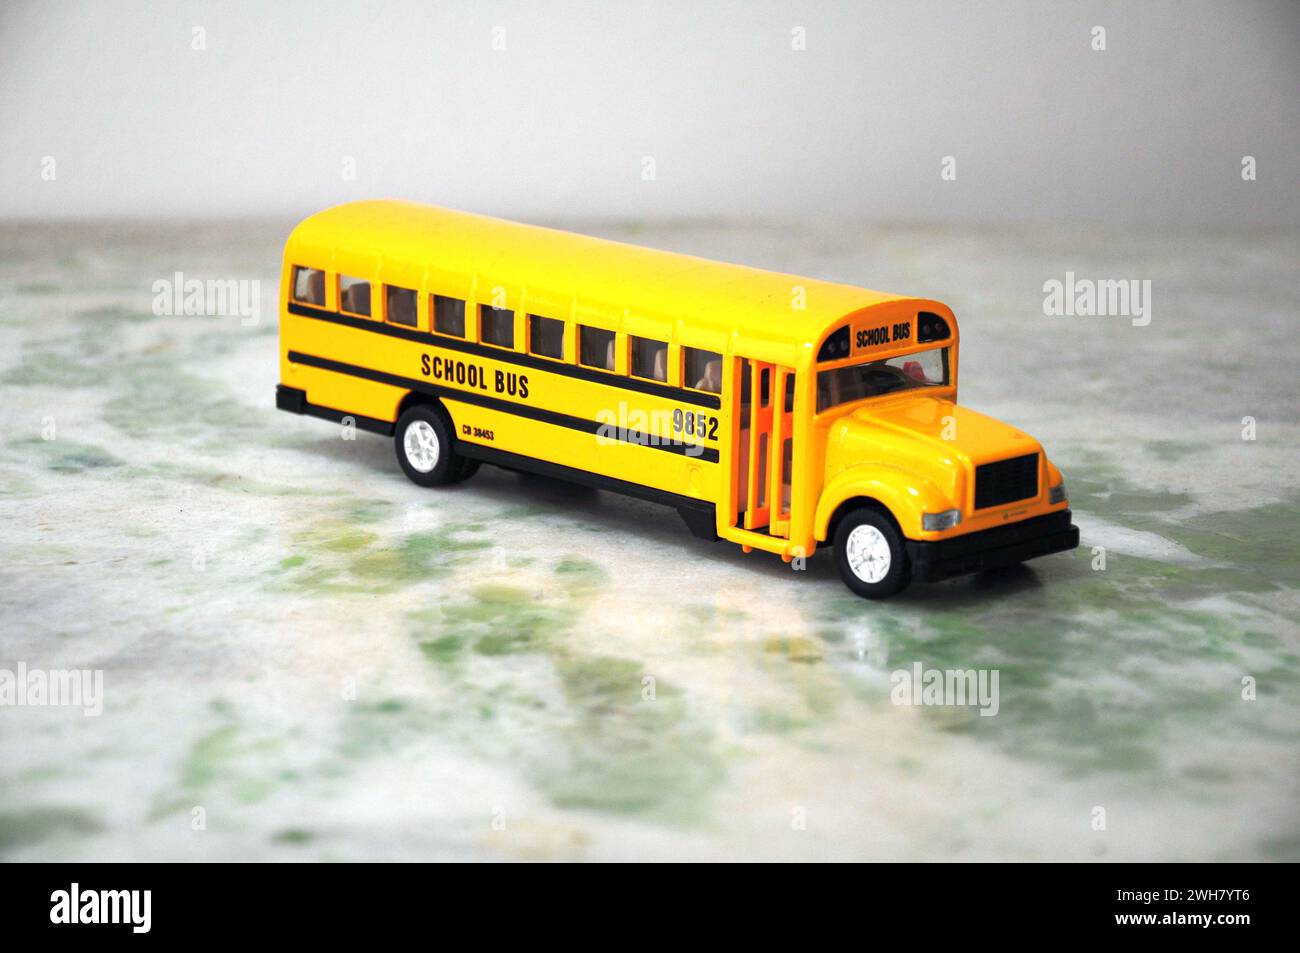 American school bus miniature in standard yellow color with view of the entrance door Stock Photo